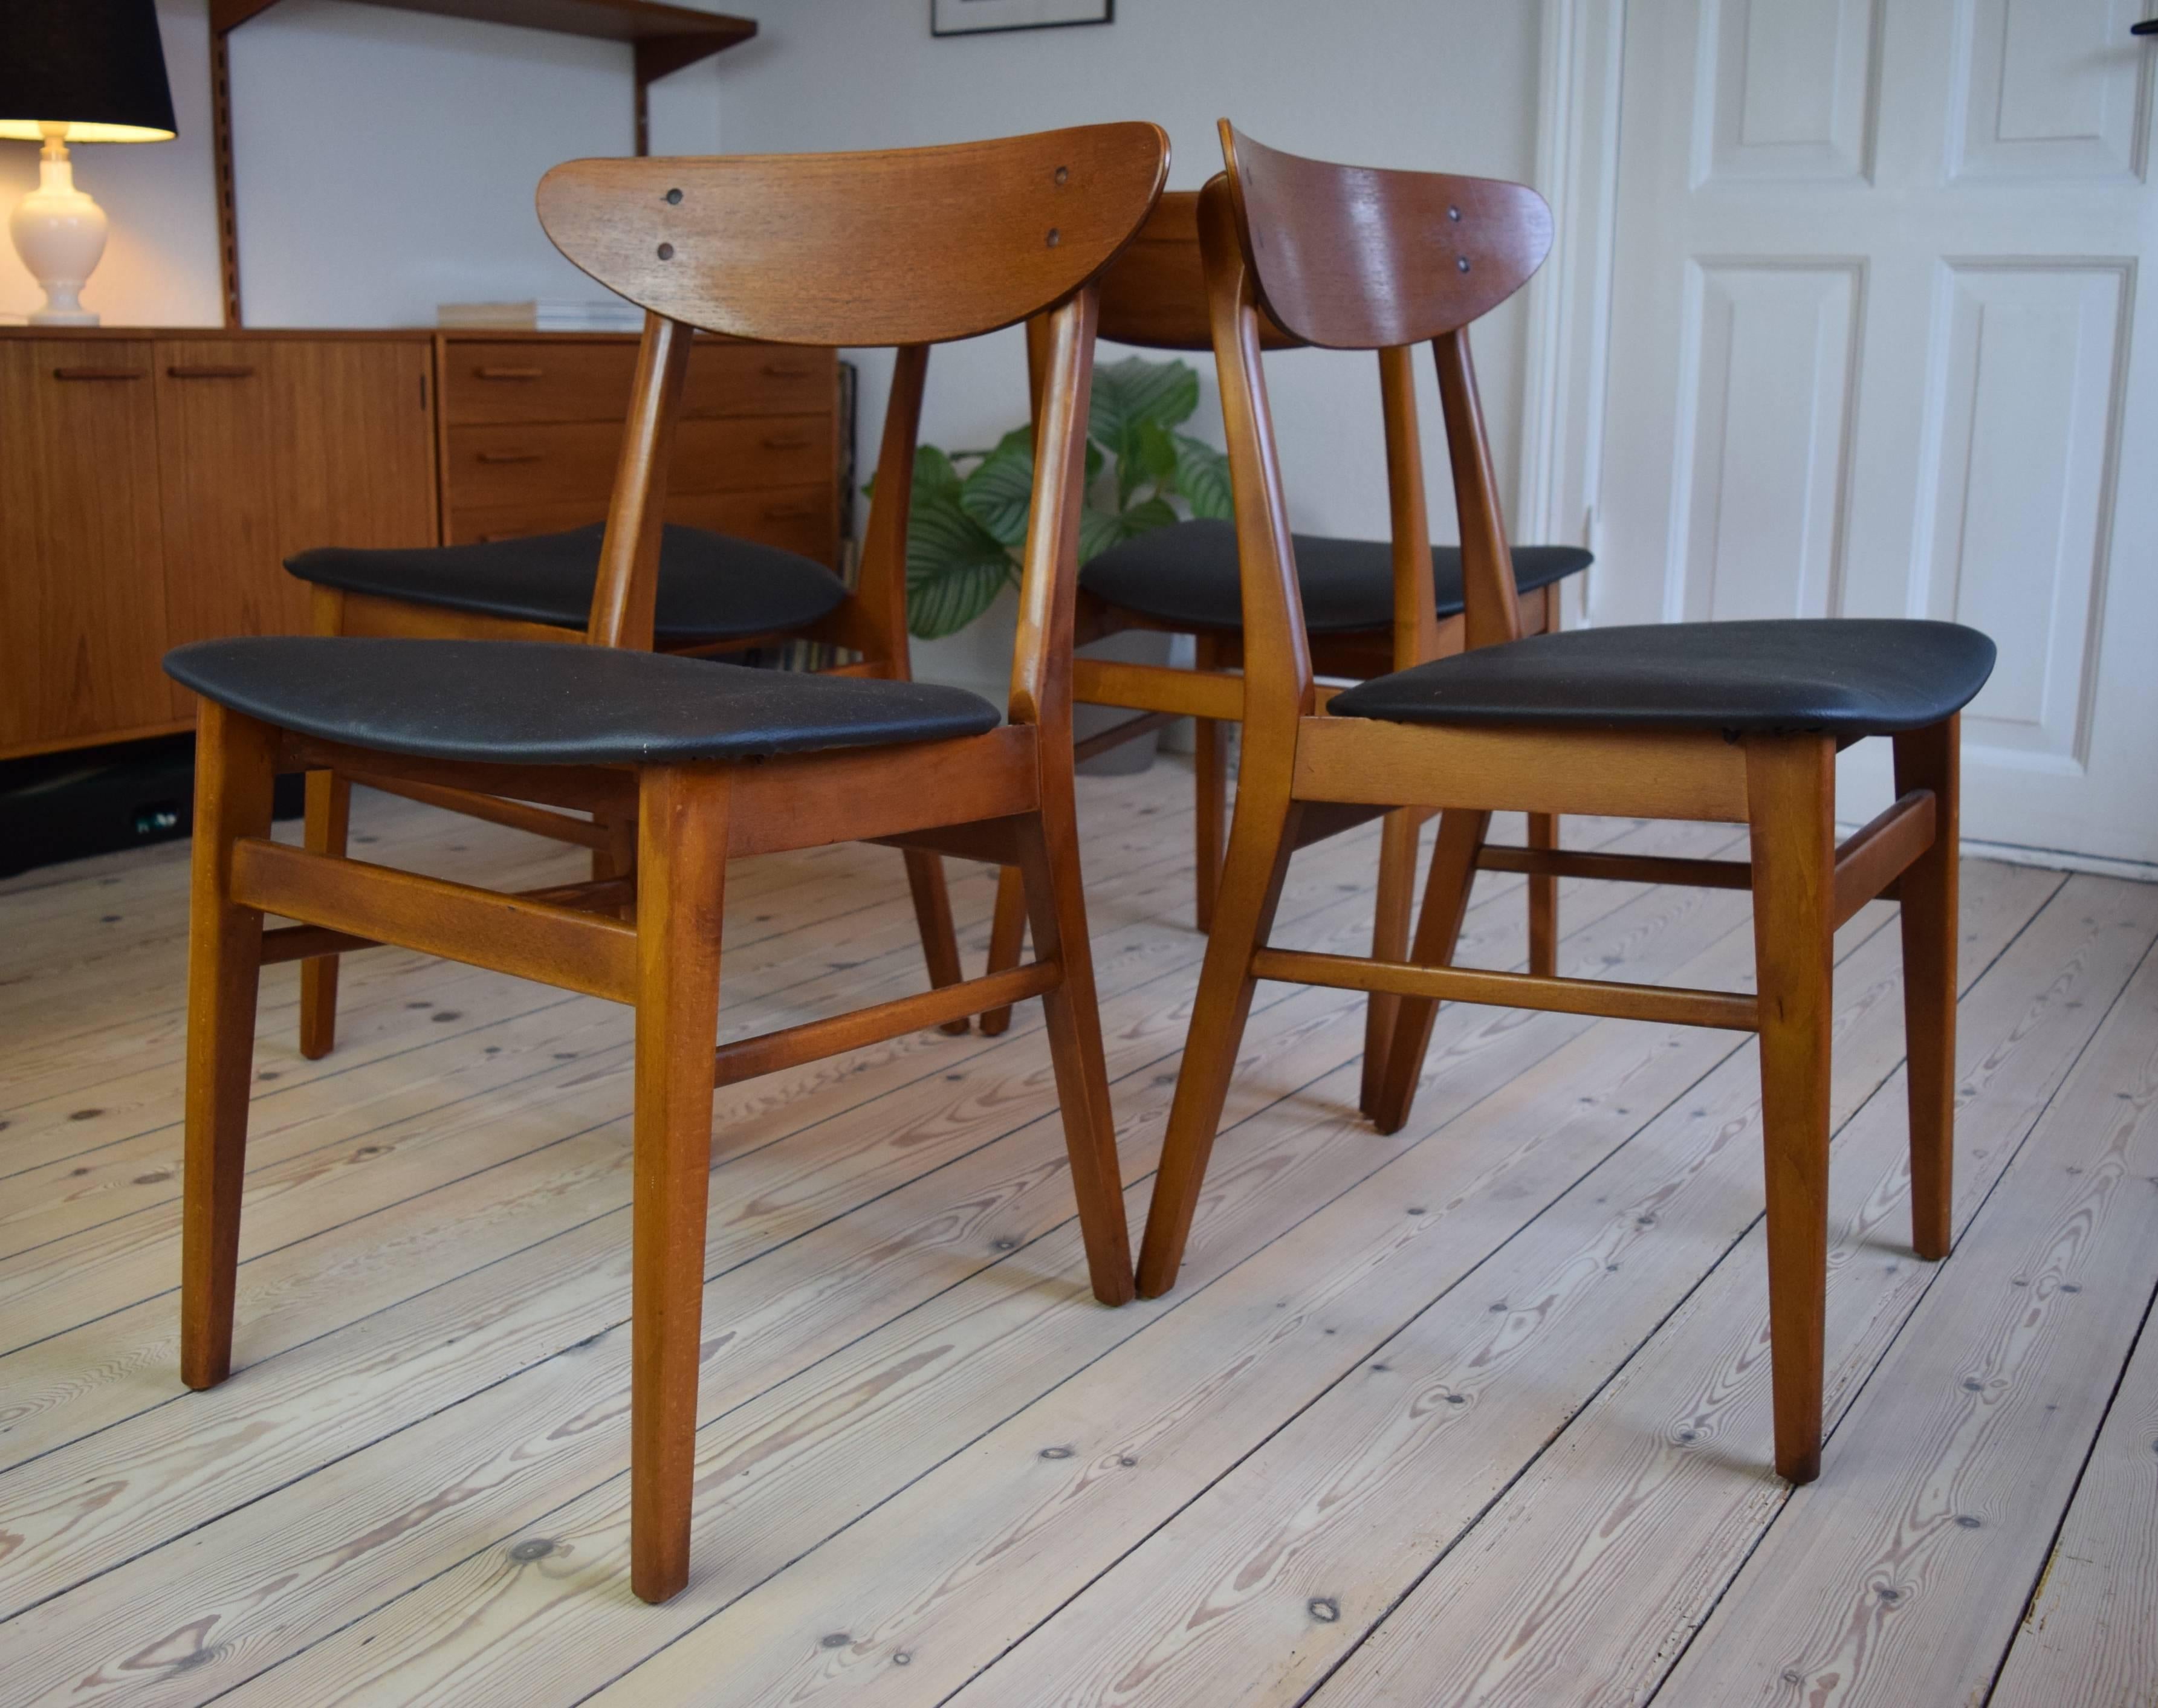 Set of four model 210 dining chairs by Farstrup manufactured in Denmark in the 1960s. These chairs feature beech frames with curved teak backrest, and are covered with black nappa.